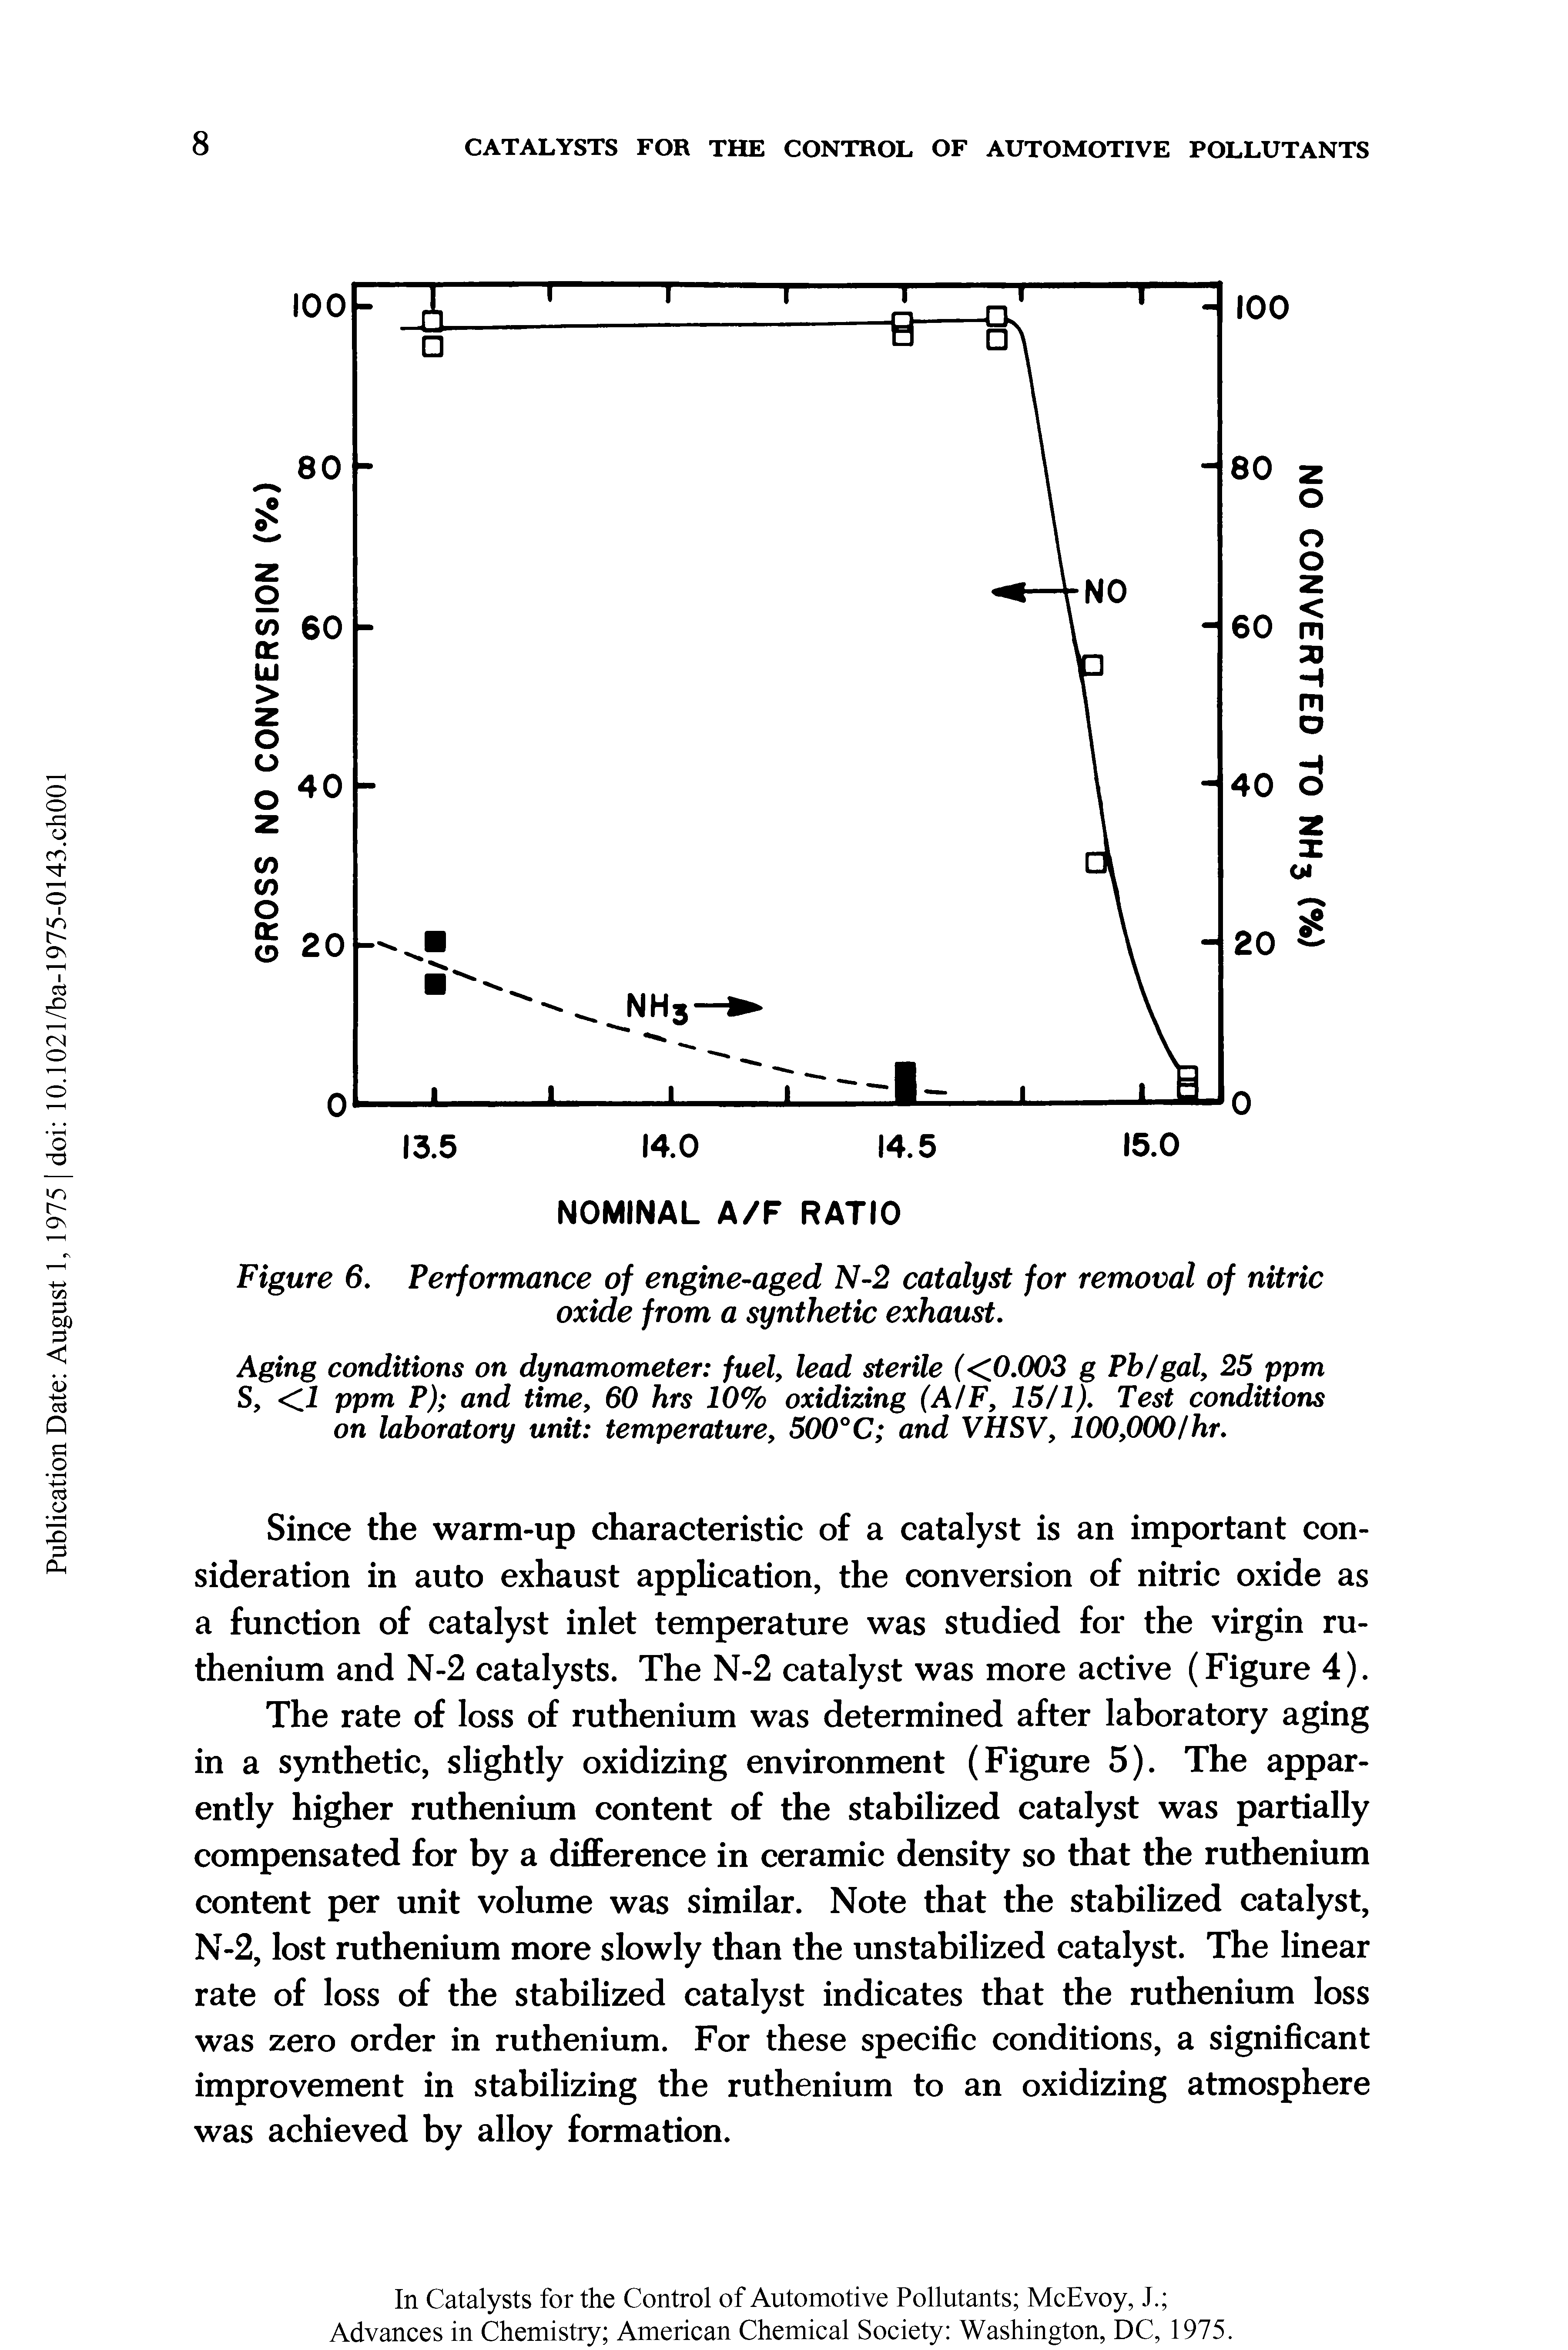 Figure 6. Performance of engine-aged N-2 catalyst for removal of nitric oxide from a synthetic exhaust.